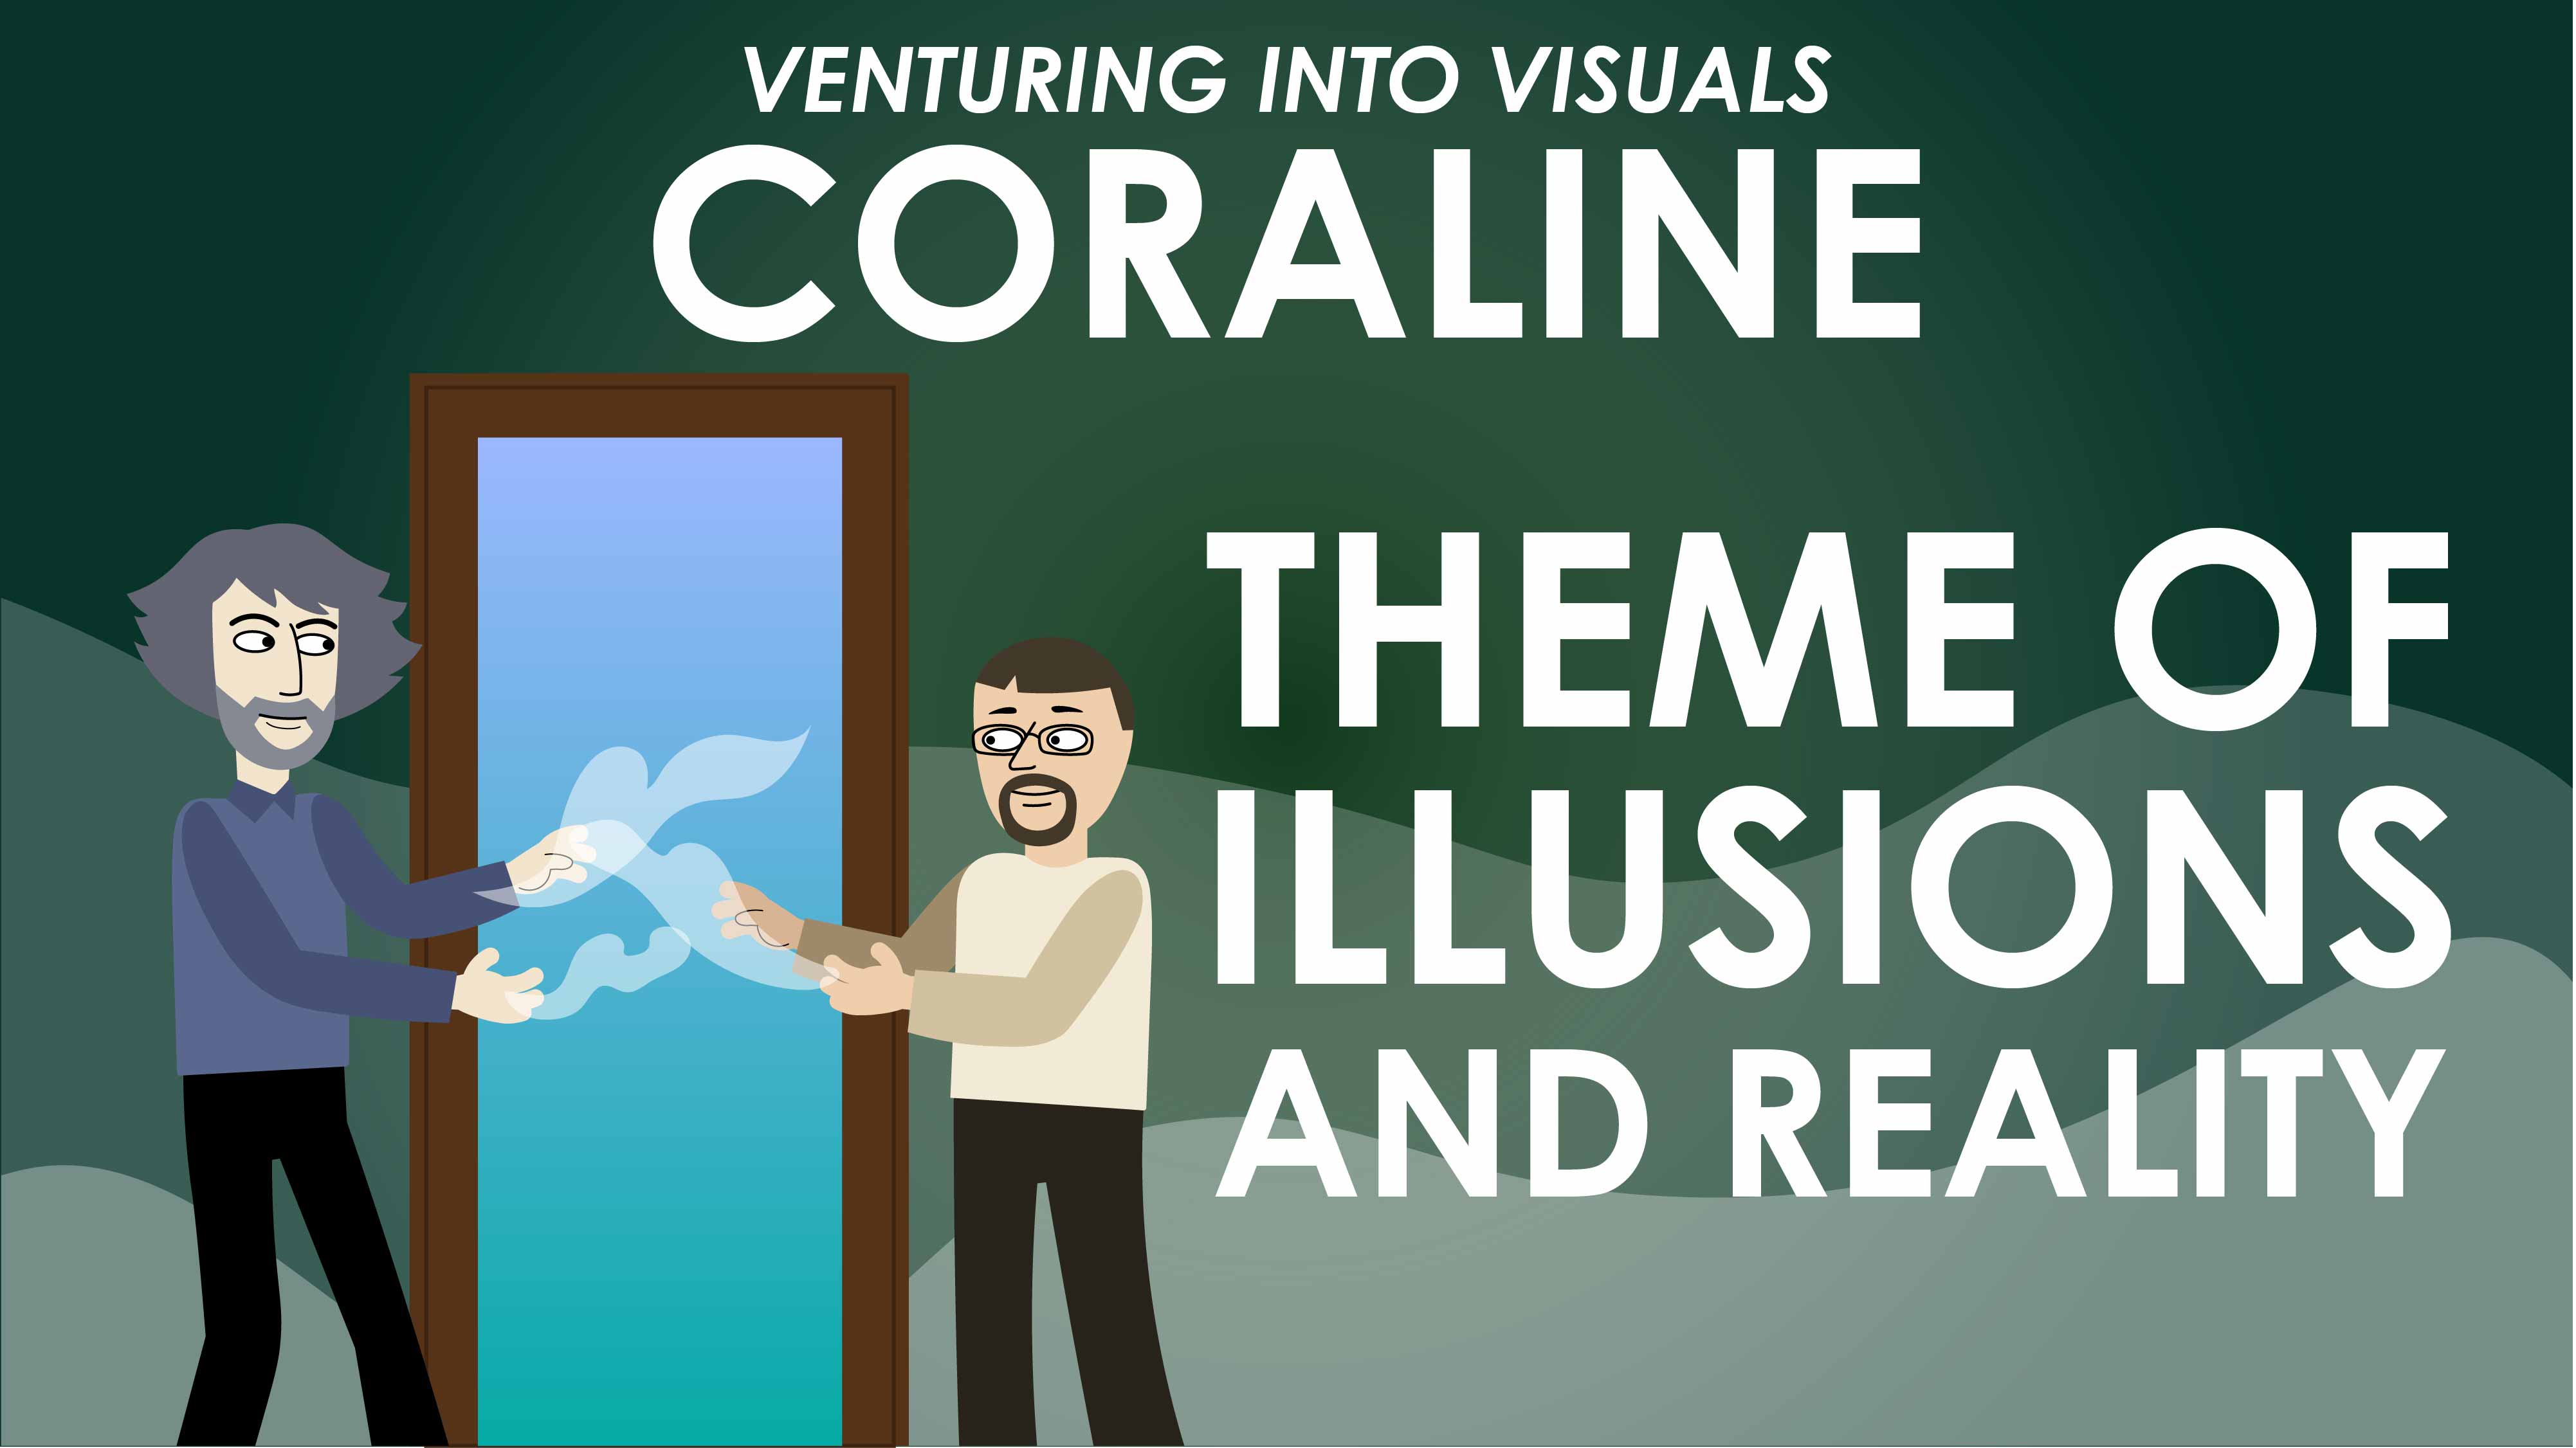 Coraline - Neil Gaiman - Theme of Illusions and Reality - Venturing Into Visuals Series